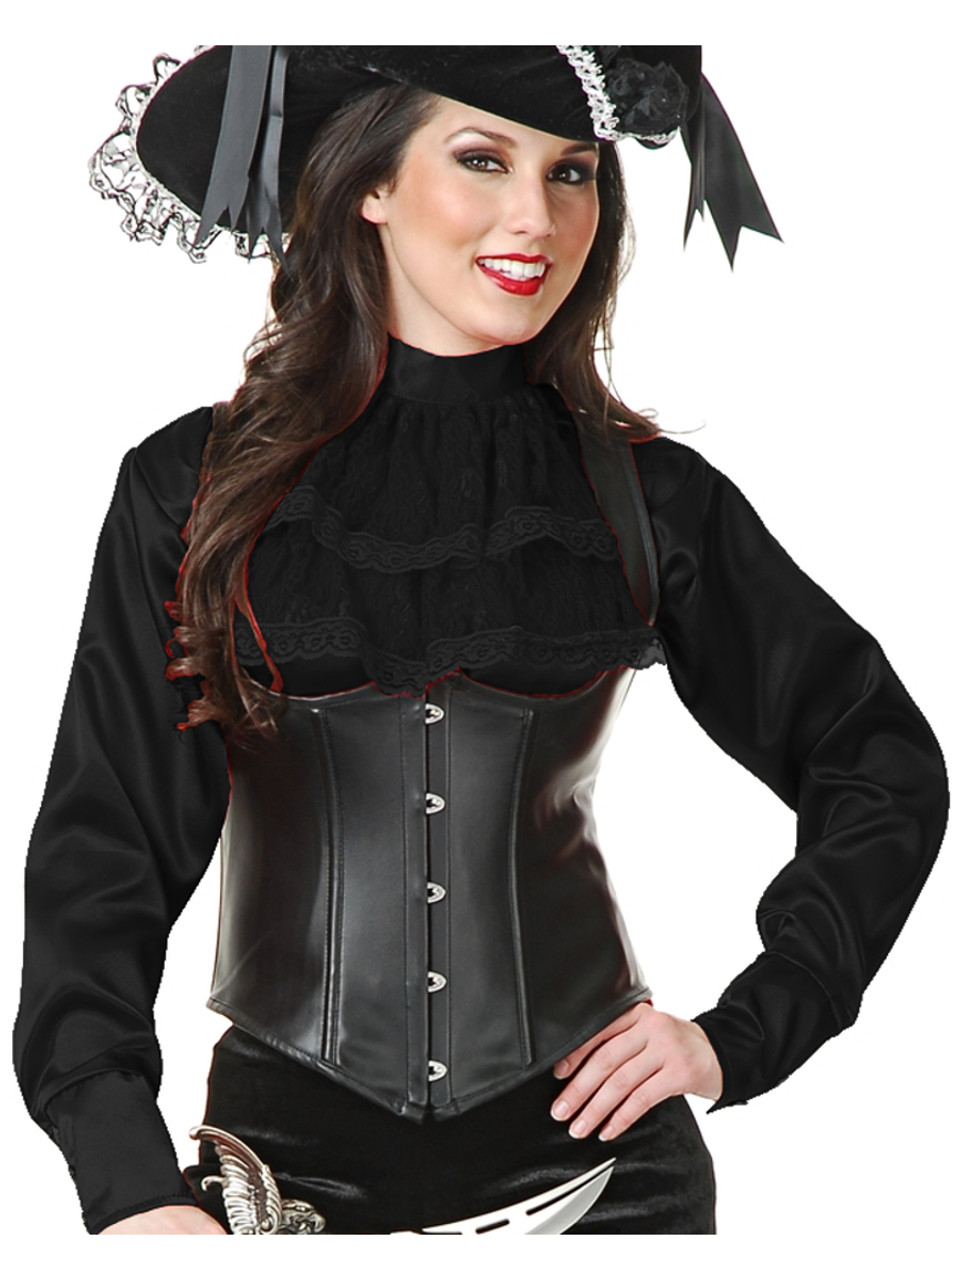 Pirate Woman Costume 4 Pc Blk/Wht High-Low Skirt Blouse Corset & Wig LG/XL